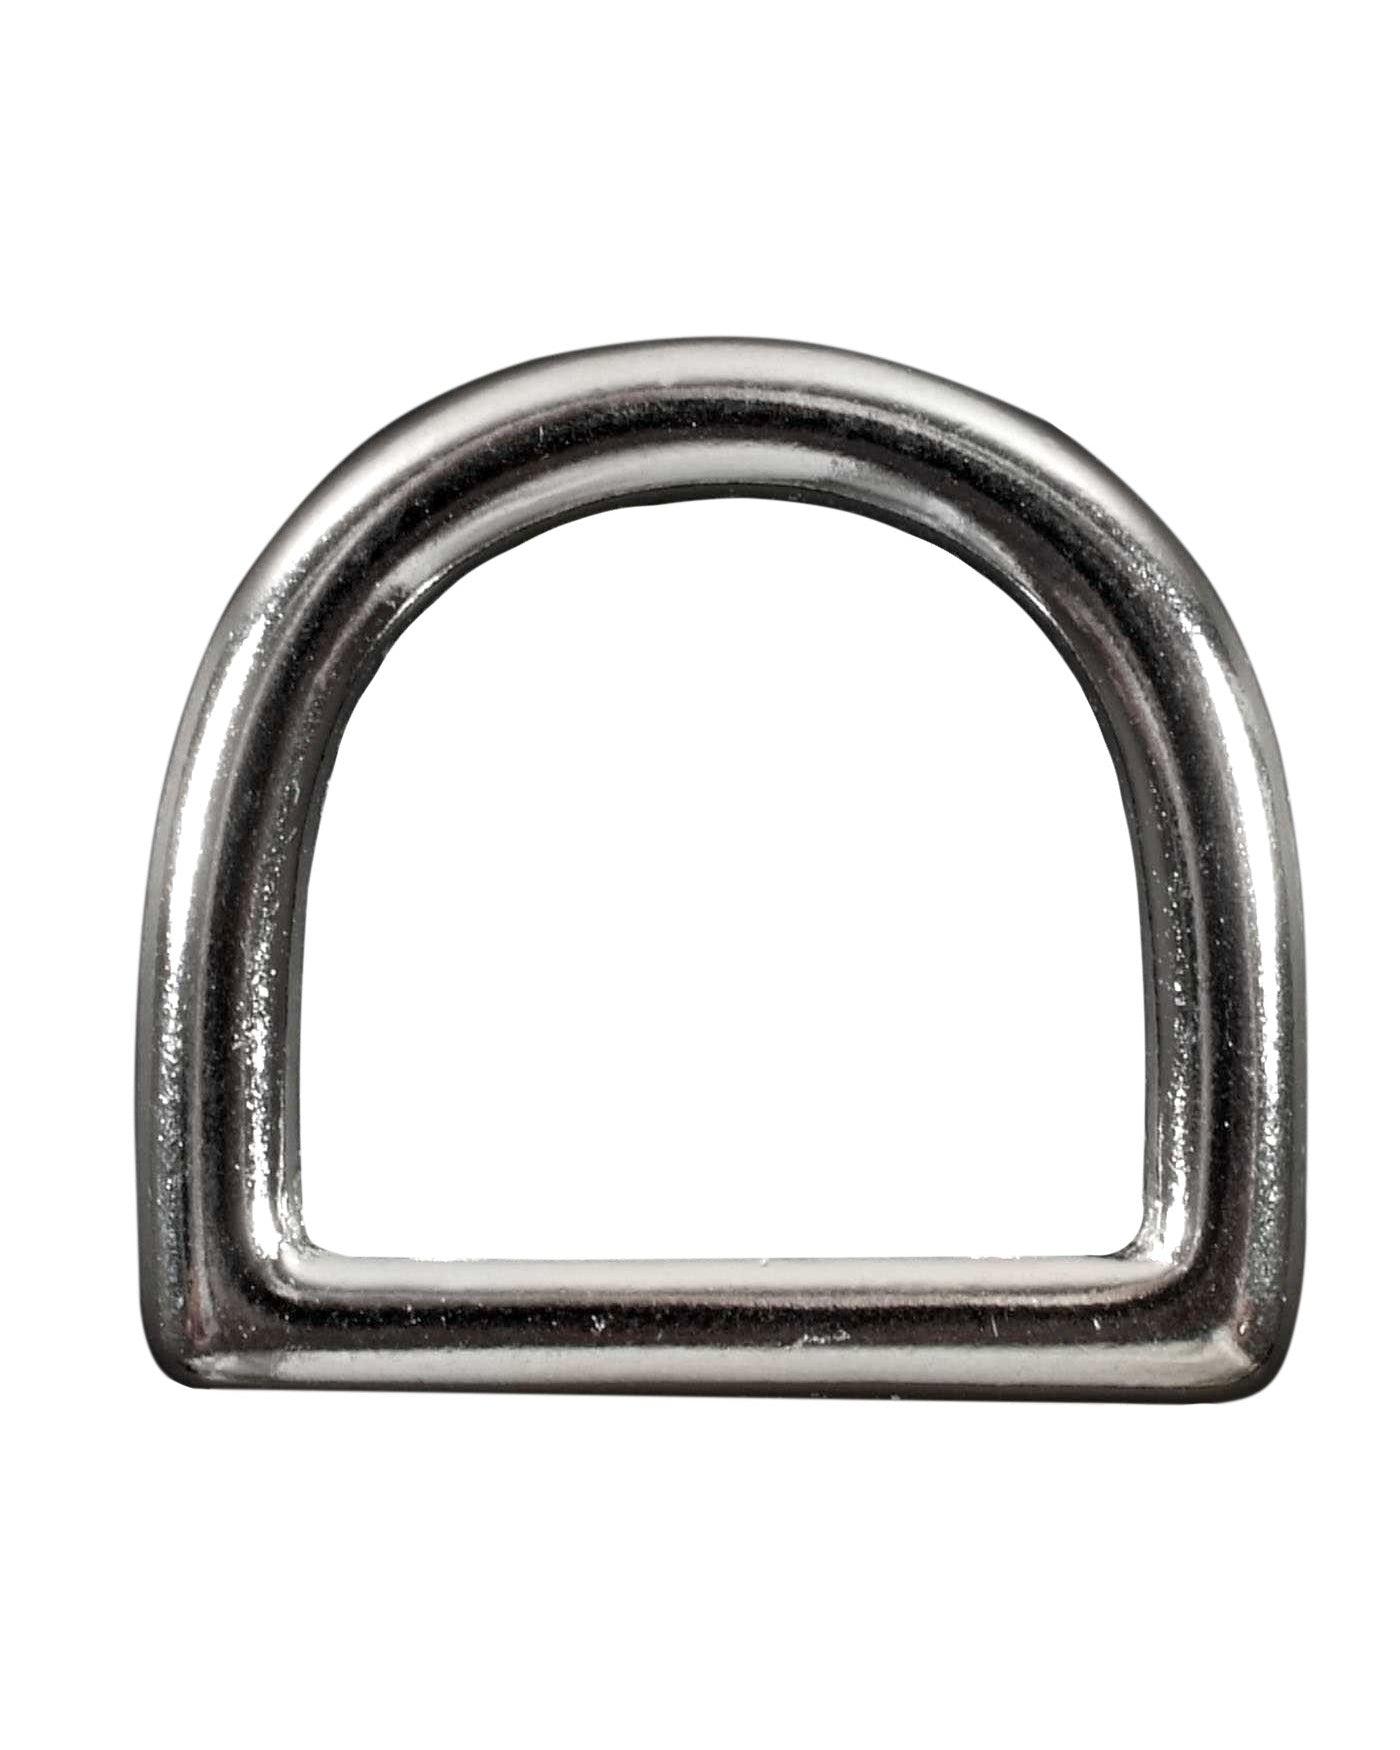 Image 1 of D-Ring, Nickel (Sold Individually) - SKU# DRG-NICKEL : Product Type Accessories & Parts : Elderly Instruments